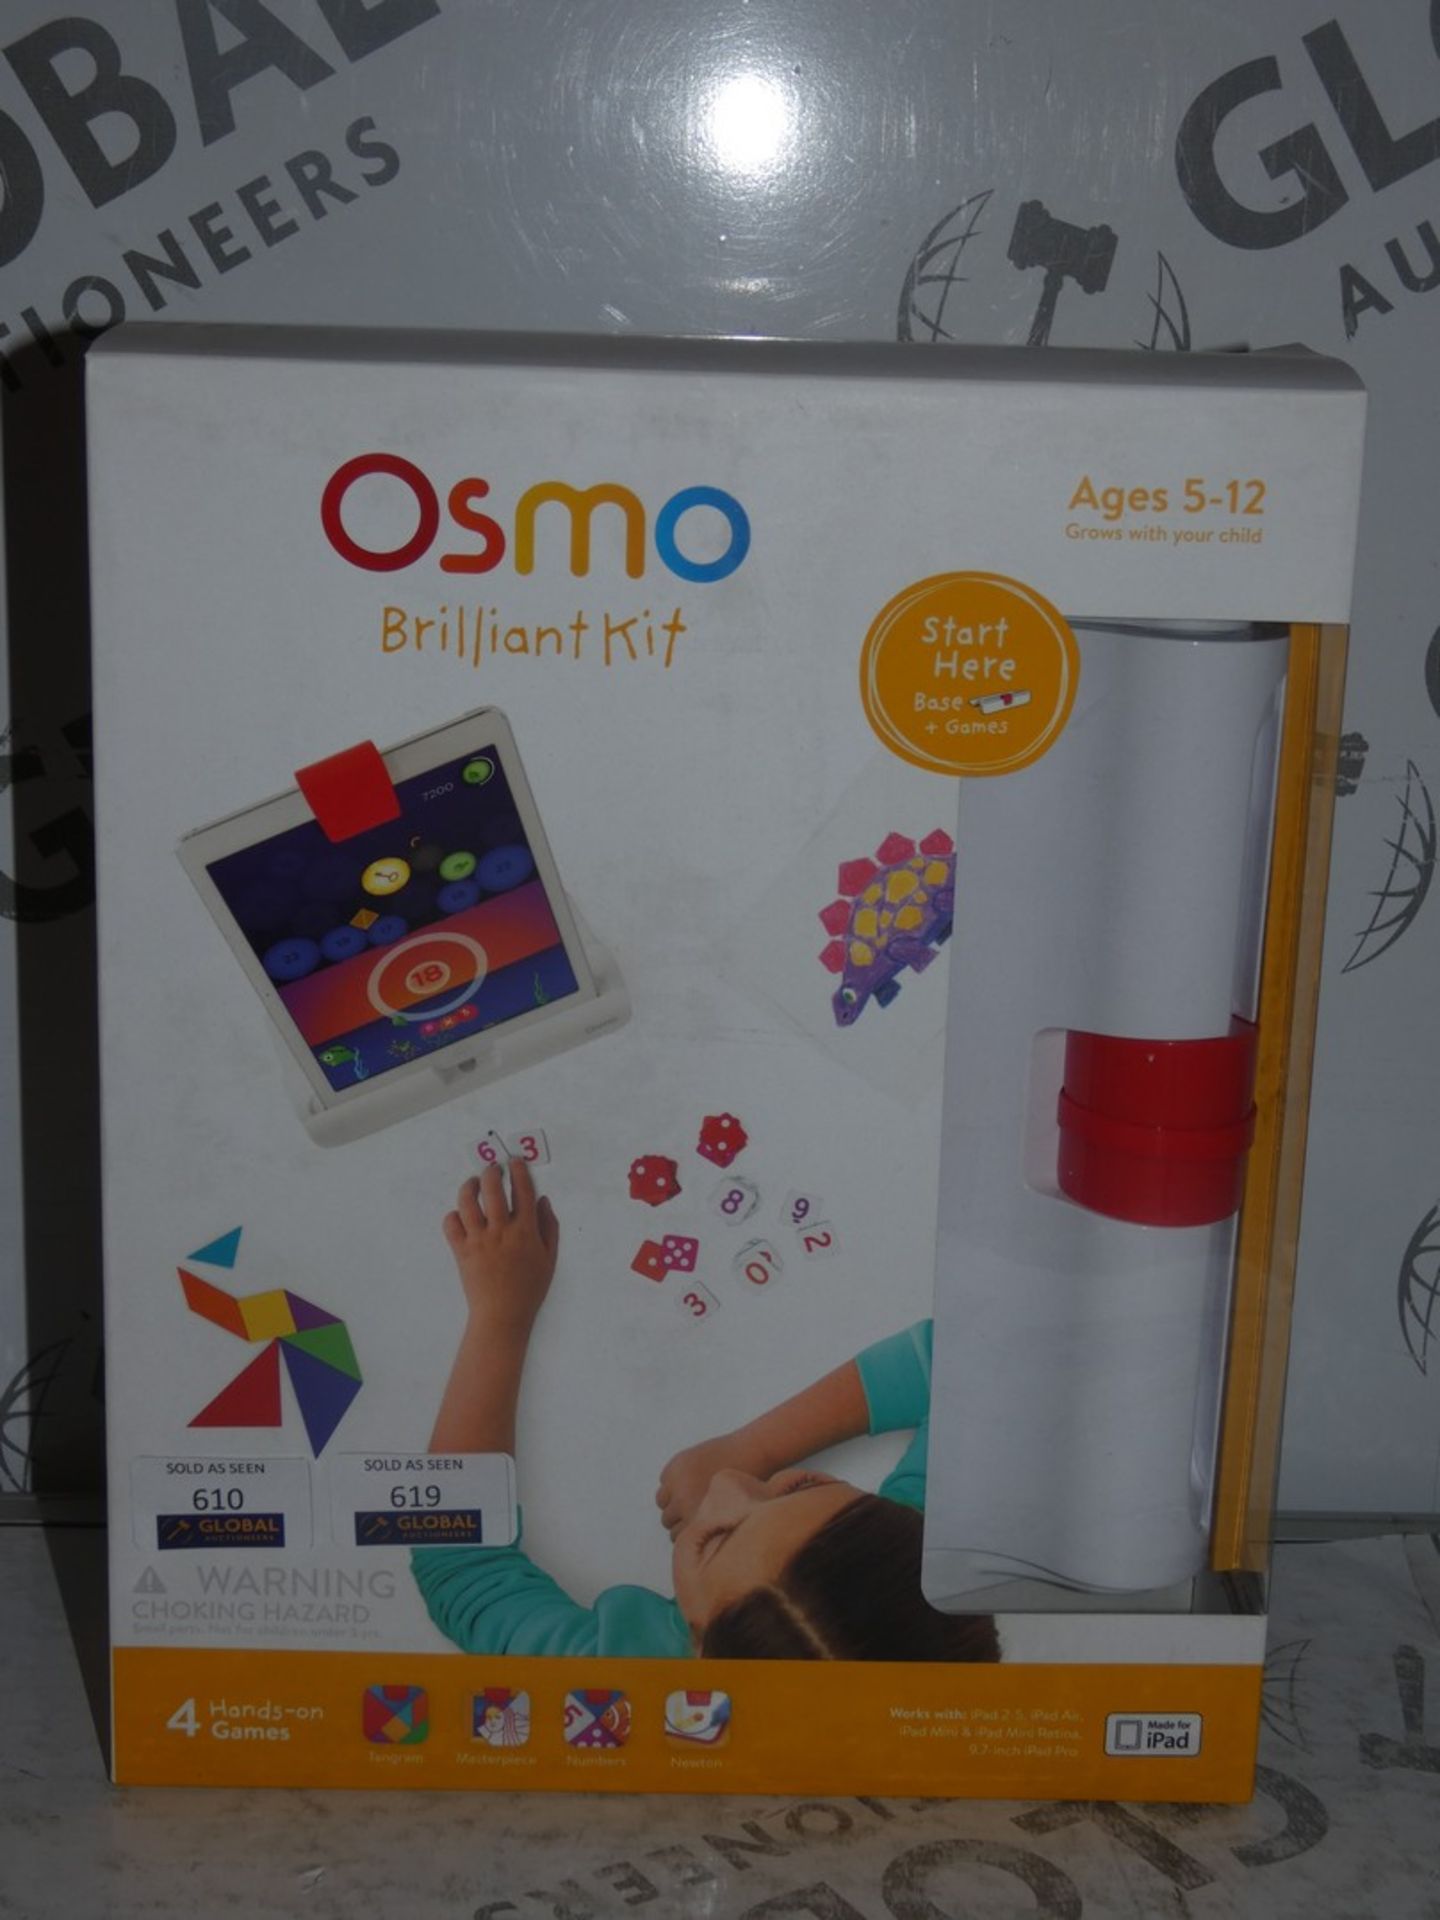 Made for Ipad Age 5-12 Billy Osmo Kit RRP£80